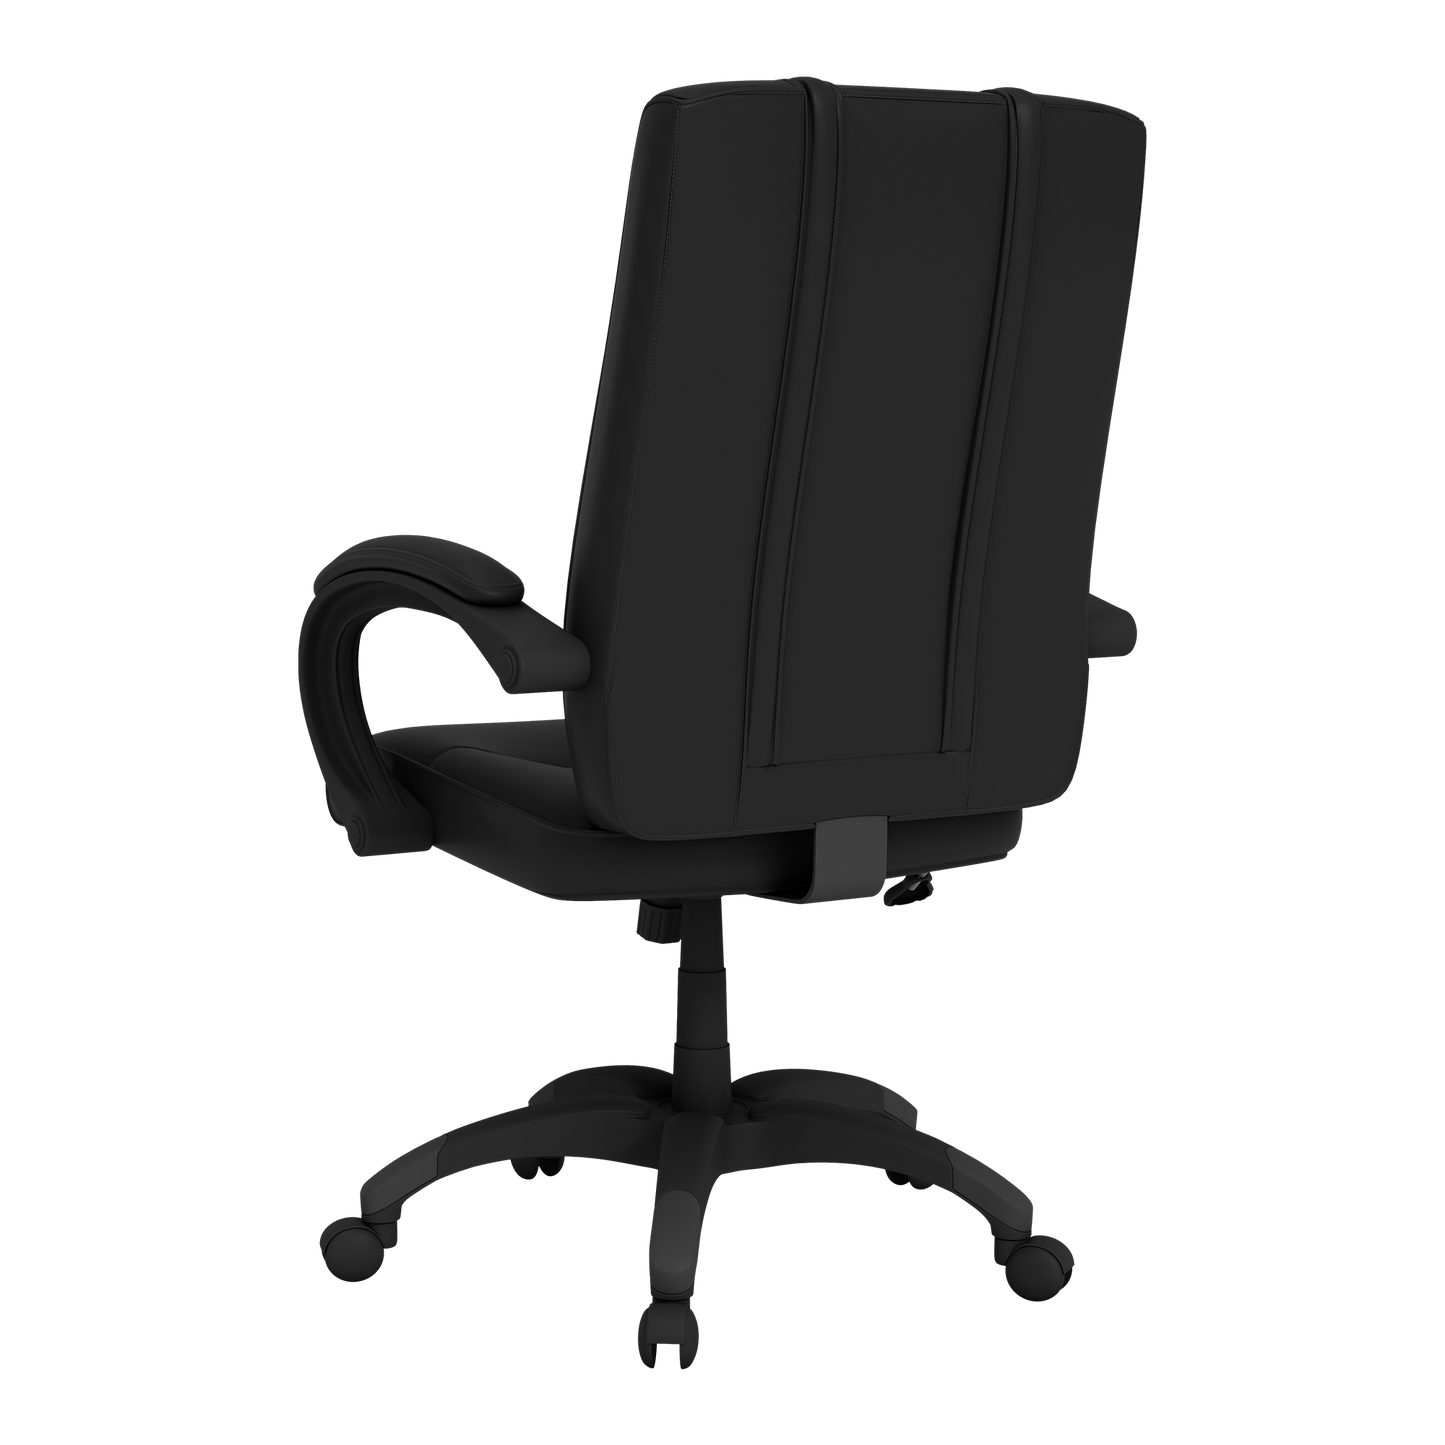 Office Chair 1000 with Corvette C6 Logo